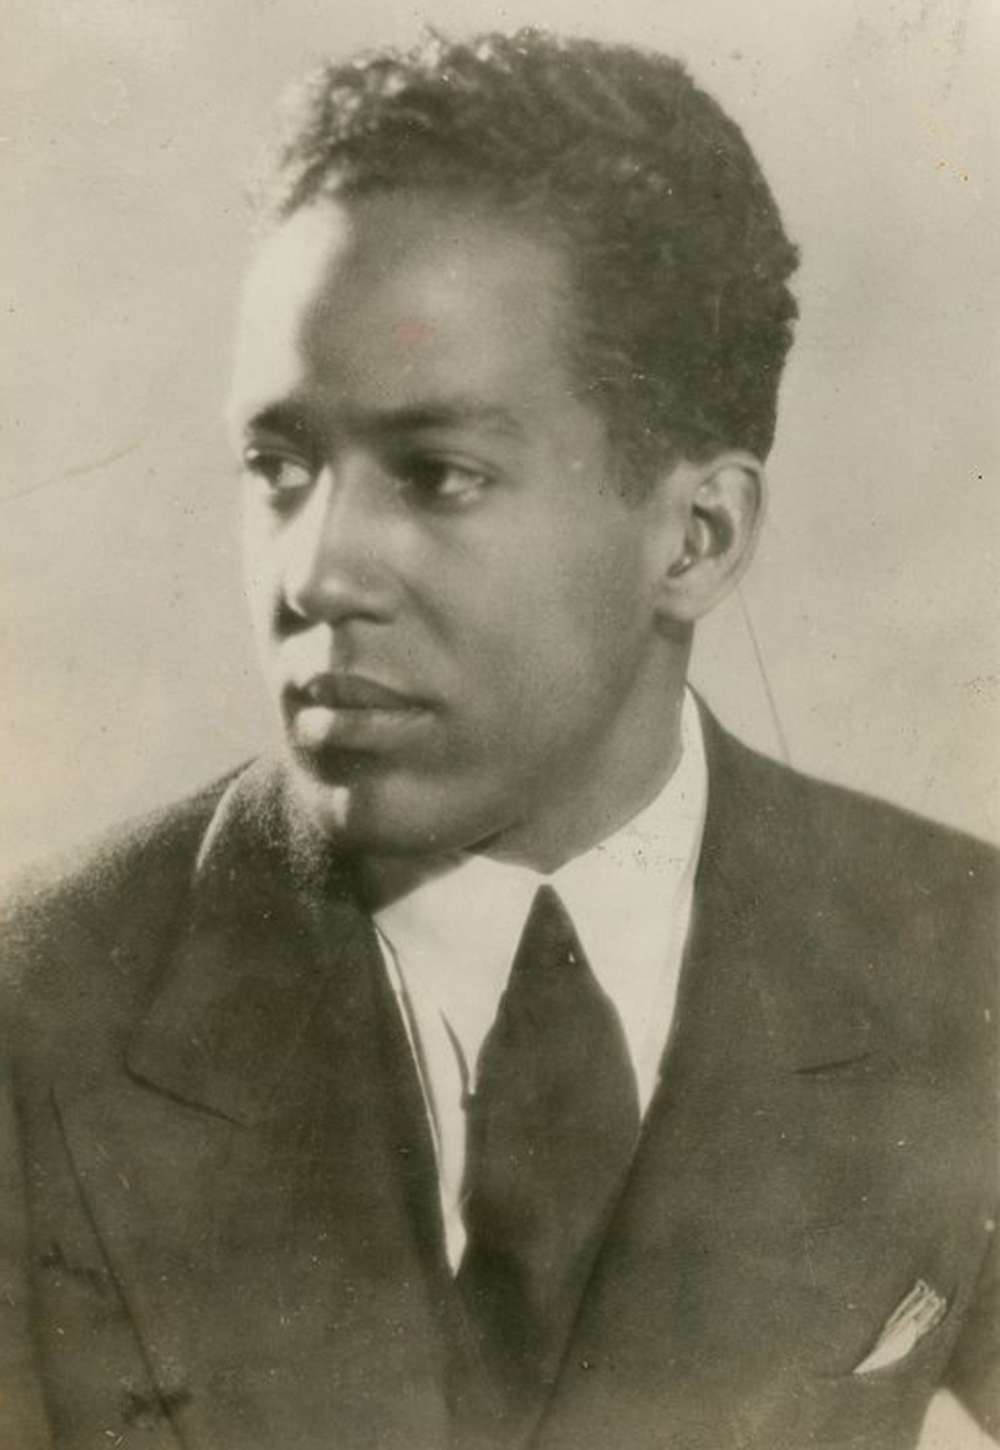 Langston Hughes as a young man. The New York Public Library, Schomburg Center for Research in Black Culture, Photographs and Prints Division.